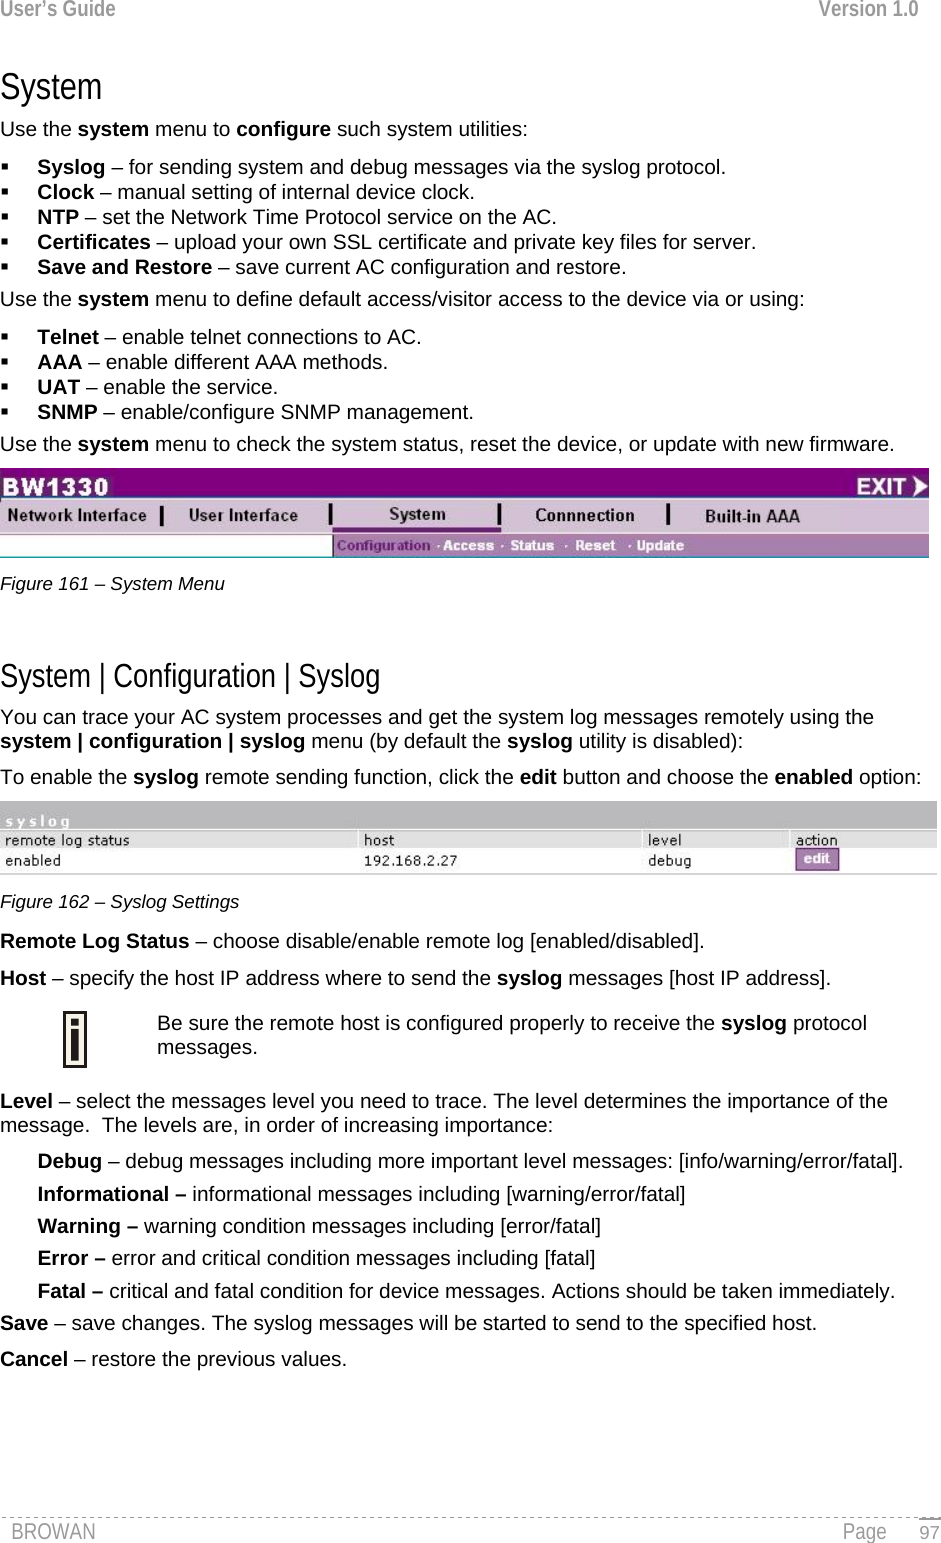 User’s Guide  Version 1.0  System Use the system menu to configure such system utilities:  Syslog – for sending system and debug messages via the syslog protocol.  Clock – manual setting of internal device clock.  NTP – set the Network Time Protocol service on the AC.  Certificates – upload your own SSL certificate and private key files for server.  Save and Restore – save current AC configuration and restore. Use the system menu to define default access/visitor access to the device via or using:  Telnet – enable telnet connections to AC.  AAA – enable different AAA methods.  UAT – enable the service.  SNMP – enable/configure SNMP management. Use the system menu to check the system status, reset the device, or update with new firmware.  Figure 161 – System Menu  System | Configuration | Syslog  You can trace your AC system processes and get the system log messages remotely using the system | configuration | syslog menu (by default the syslog utility is disabled): To enable the syslog remote sending function, click the edit button and choose the enabled option:  Figure 162 – Syslog Settings Remote Log Status – choose disable/enable remote log [enabled/disabled]. Host – specify the host IP address where to send the syslog messages [host IP address]. Be sure the remote host is configured properly to receive the syslog protocol messages.  Level – select the messages level you need to trace. The level determines the importance of the message.  The levels are, in order of increasing importance: Debug – debug messages including more important level messages: [info/warning/error/fatal]. Informational – informational messages including [warning/error/fatal] Warning – warning condition messages including [error/fatal] Error – error and critical condition messages including [fatal] Fatal – critical and fatal condition for device messages. Actions should be taken immediately. Save – save changes. The syslog messages will be started to send to the specified host. Cancel – restore the previous values.  BROWAN                                                                                                                                               Page   97